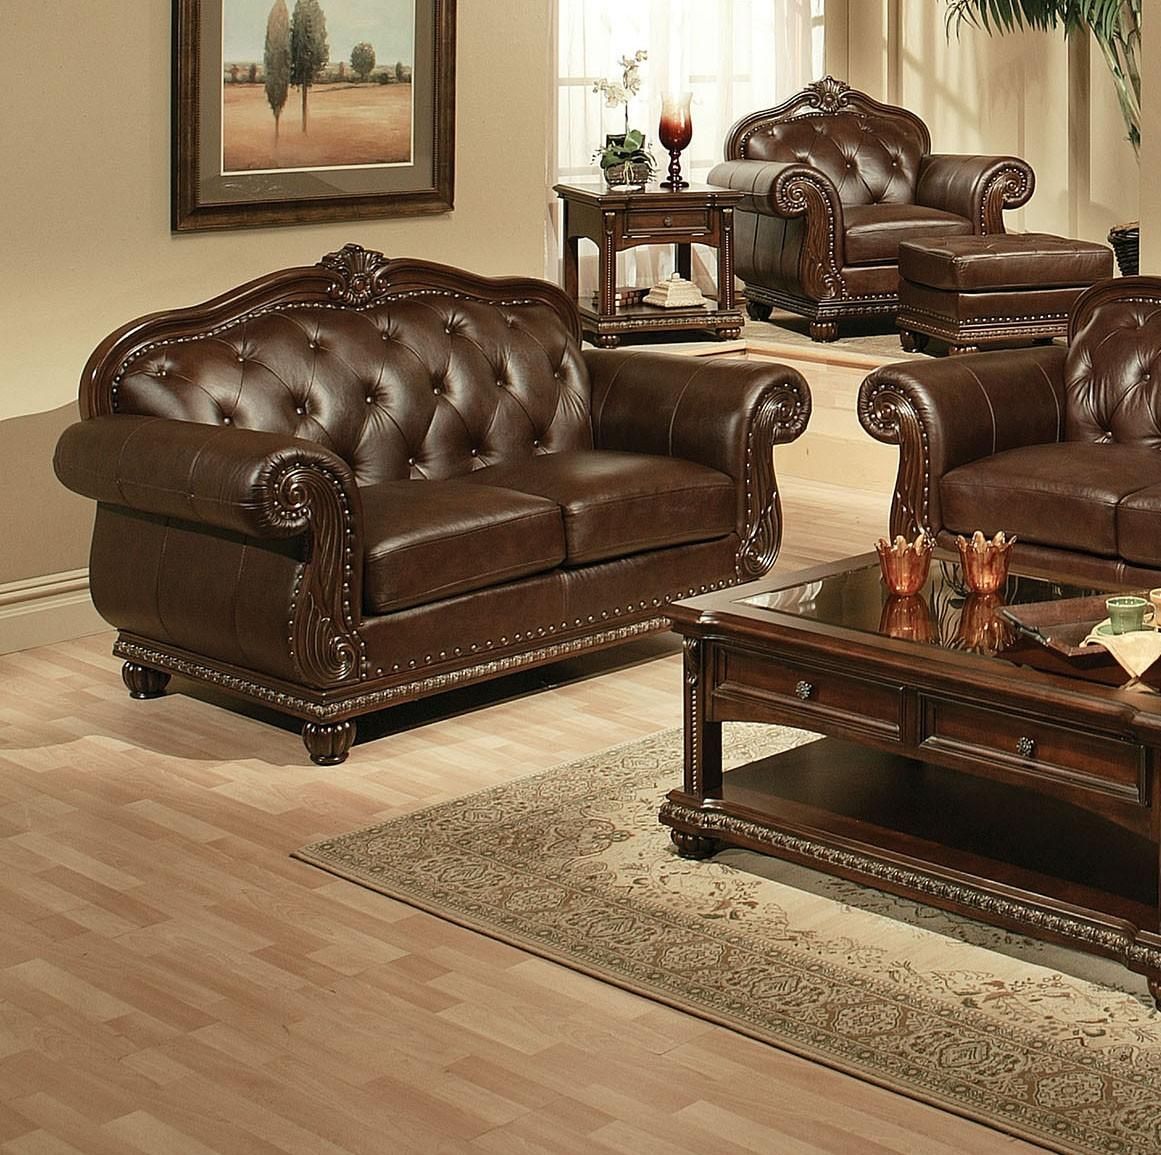 Acme Furniture 15030 Anondale Espresso Top Grain Leather Sofa Set 5 Pcs  Classic – Buy Online On Ny Furniture Outlet In Top Grain Leather Loveseats (View 11 of 15)